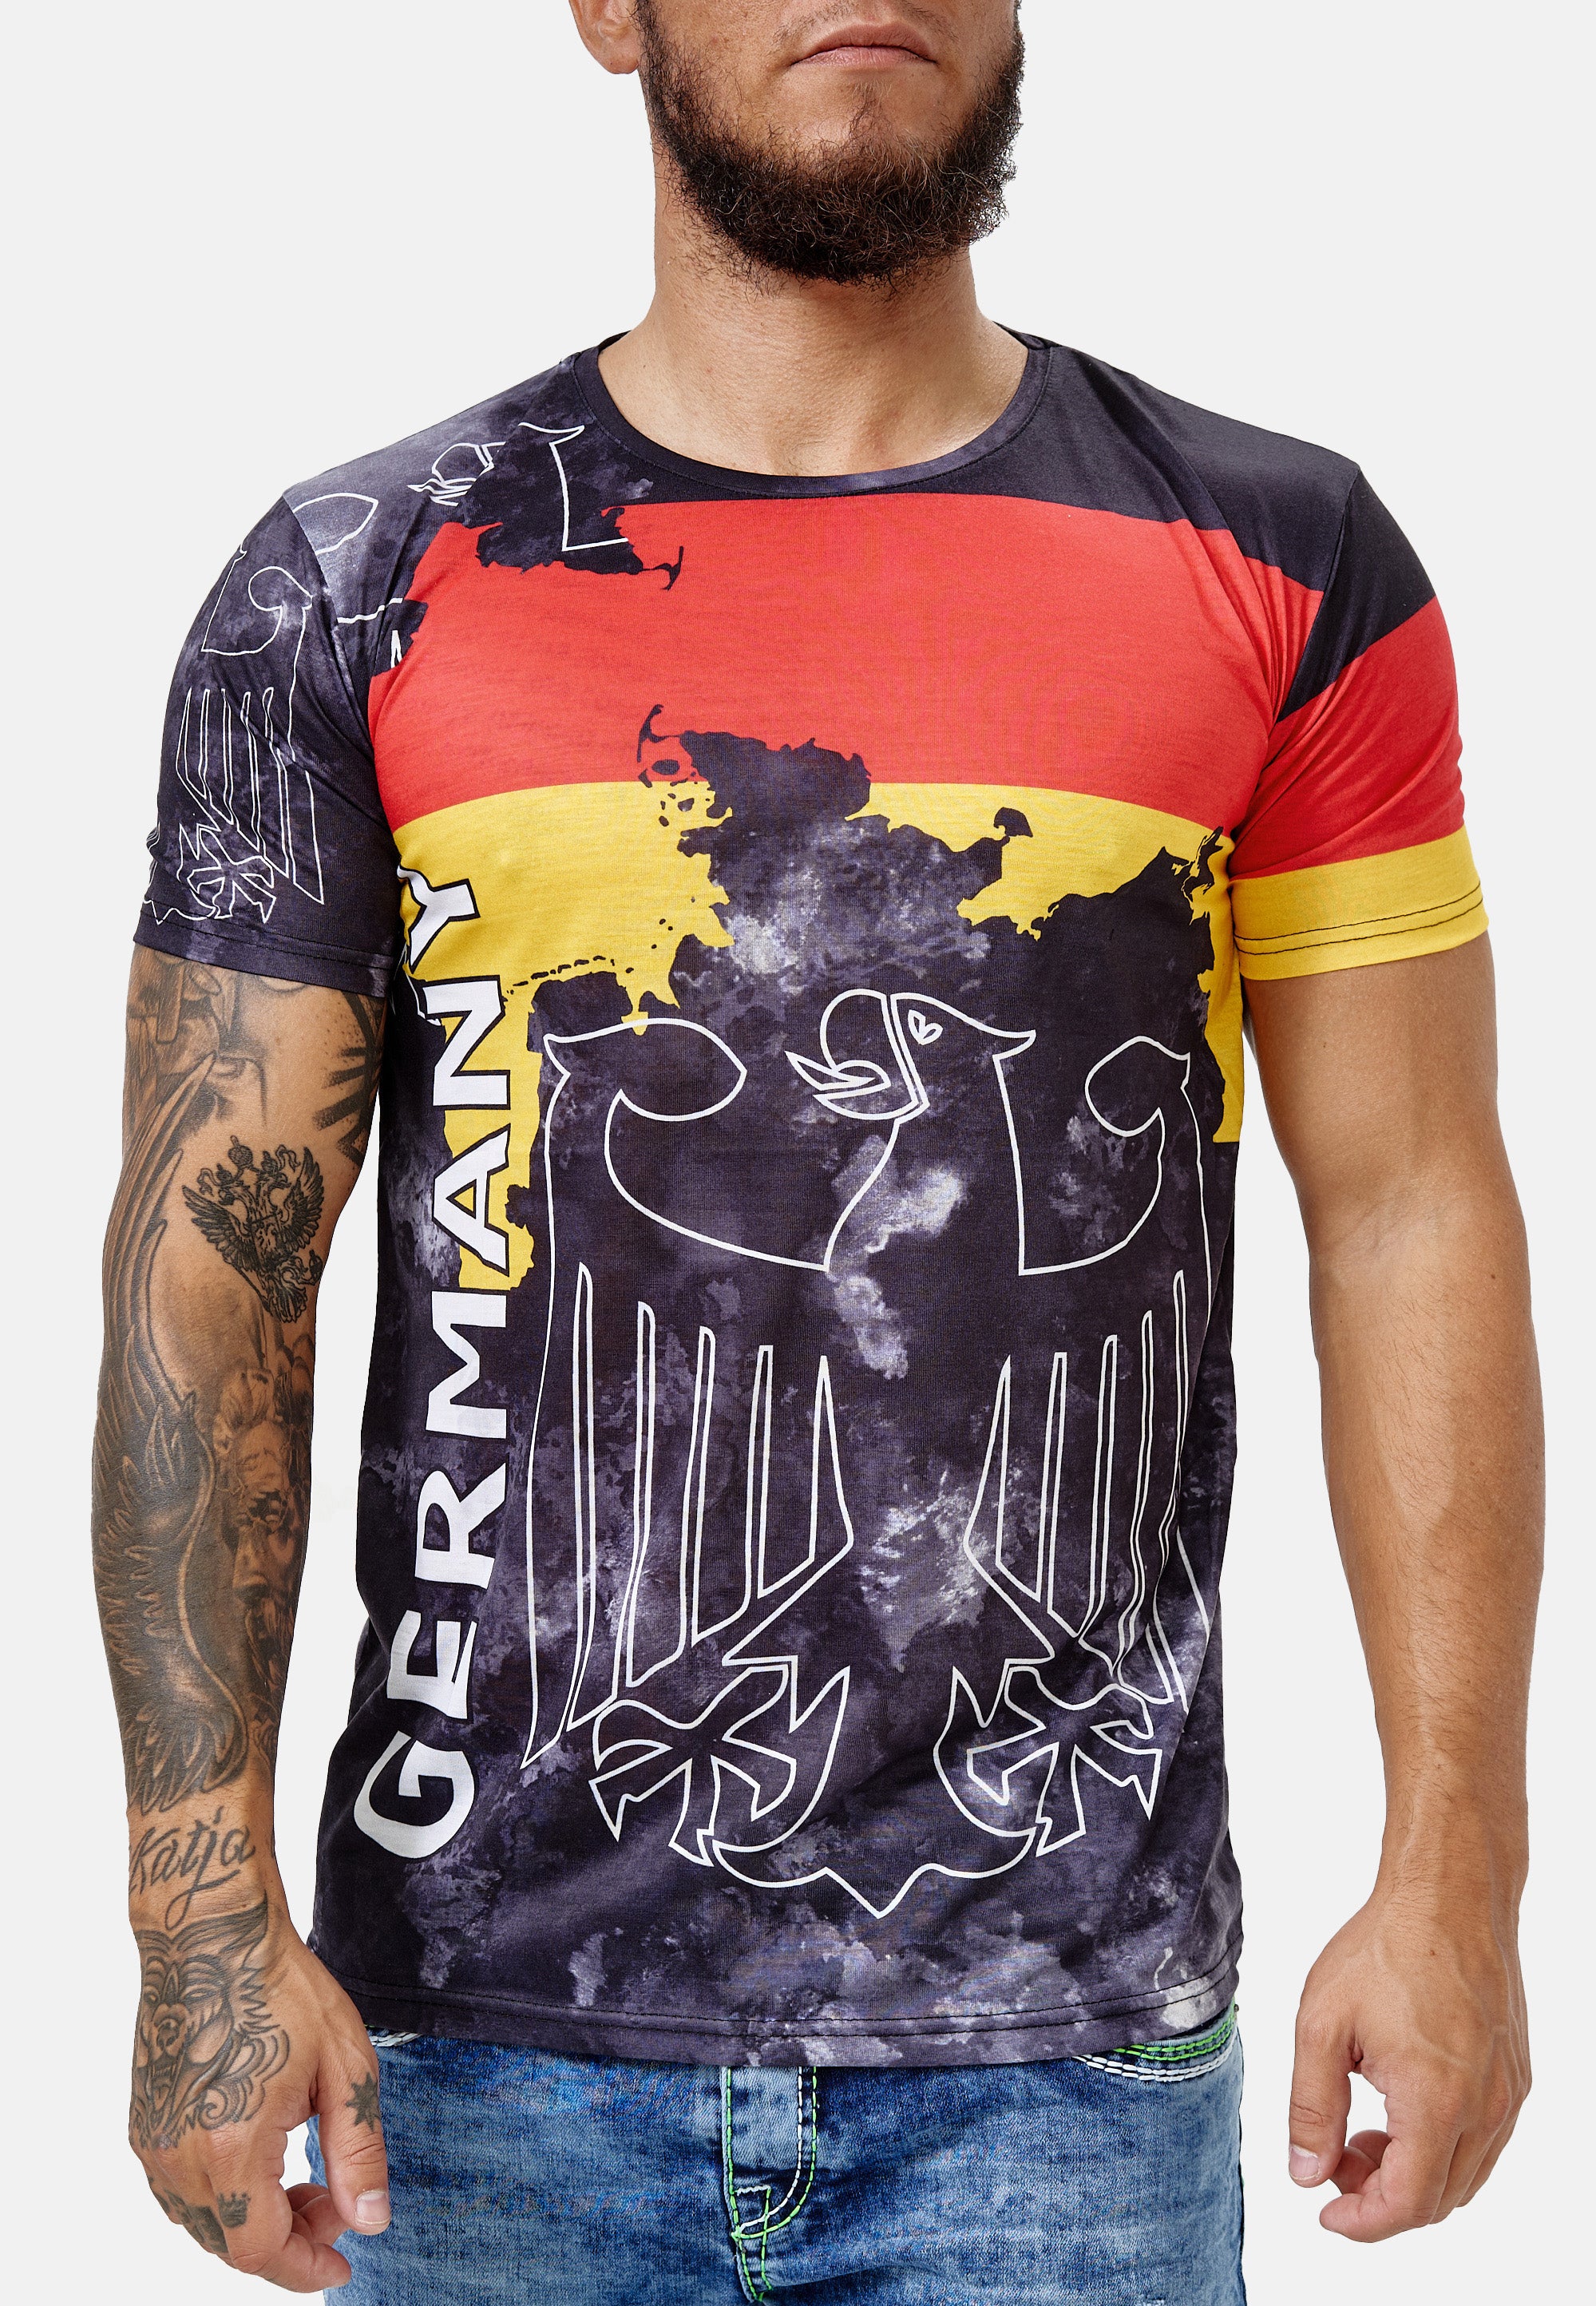 GERMANY Flag T-Shirt Graphic Print Overt X92 STOP - FASH - Multicolor